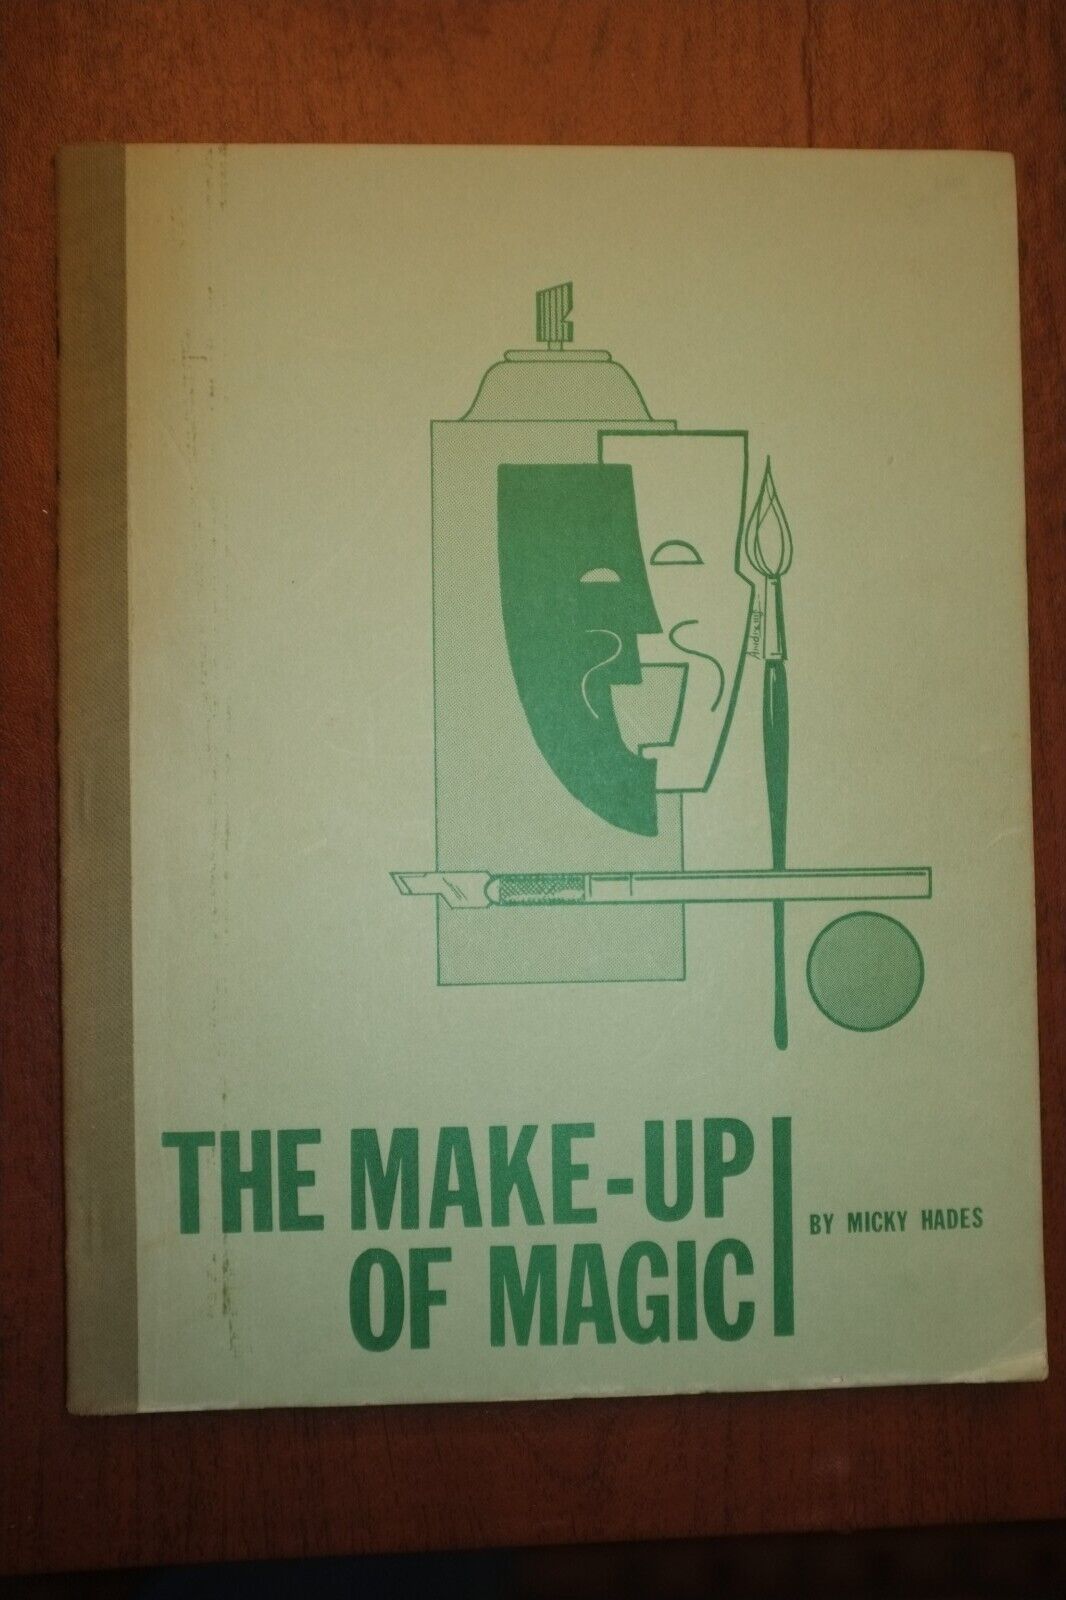 The Make Up of Magic, by Micky Hades 1962 - Excellent